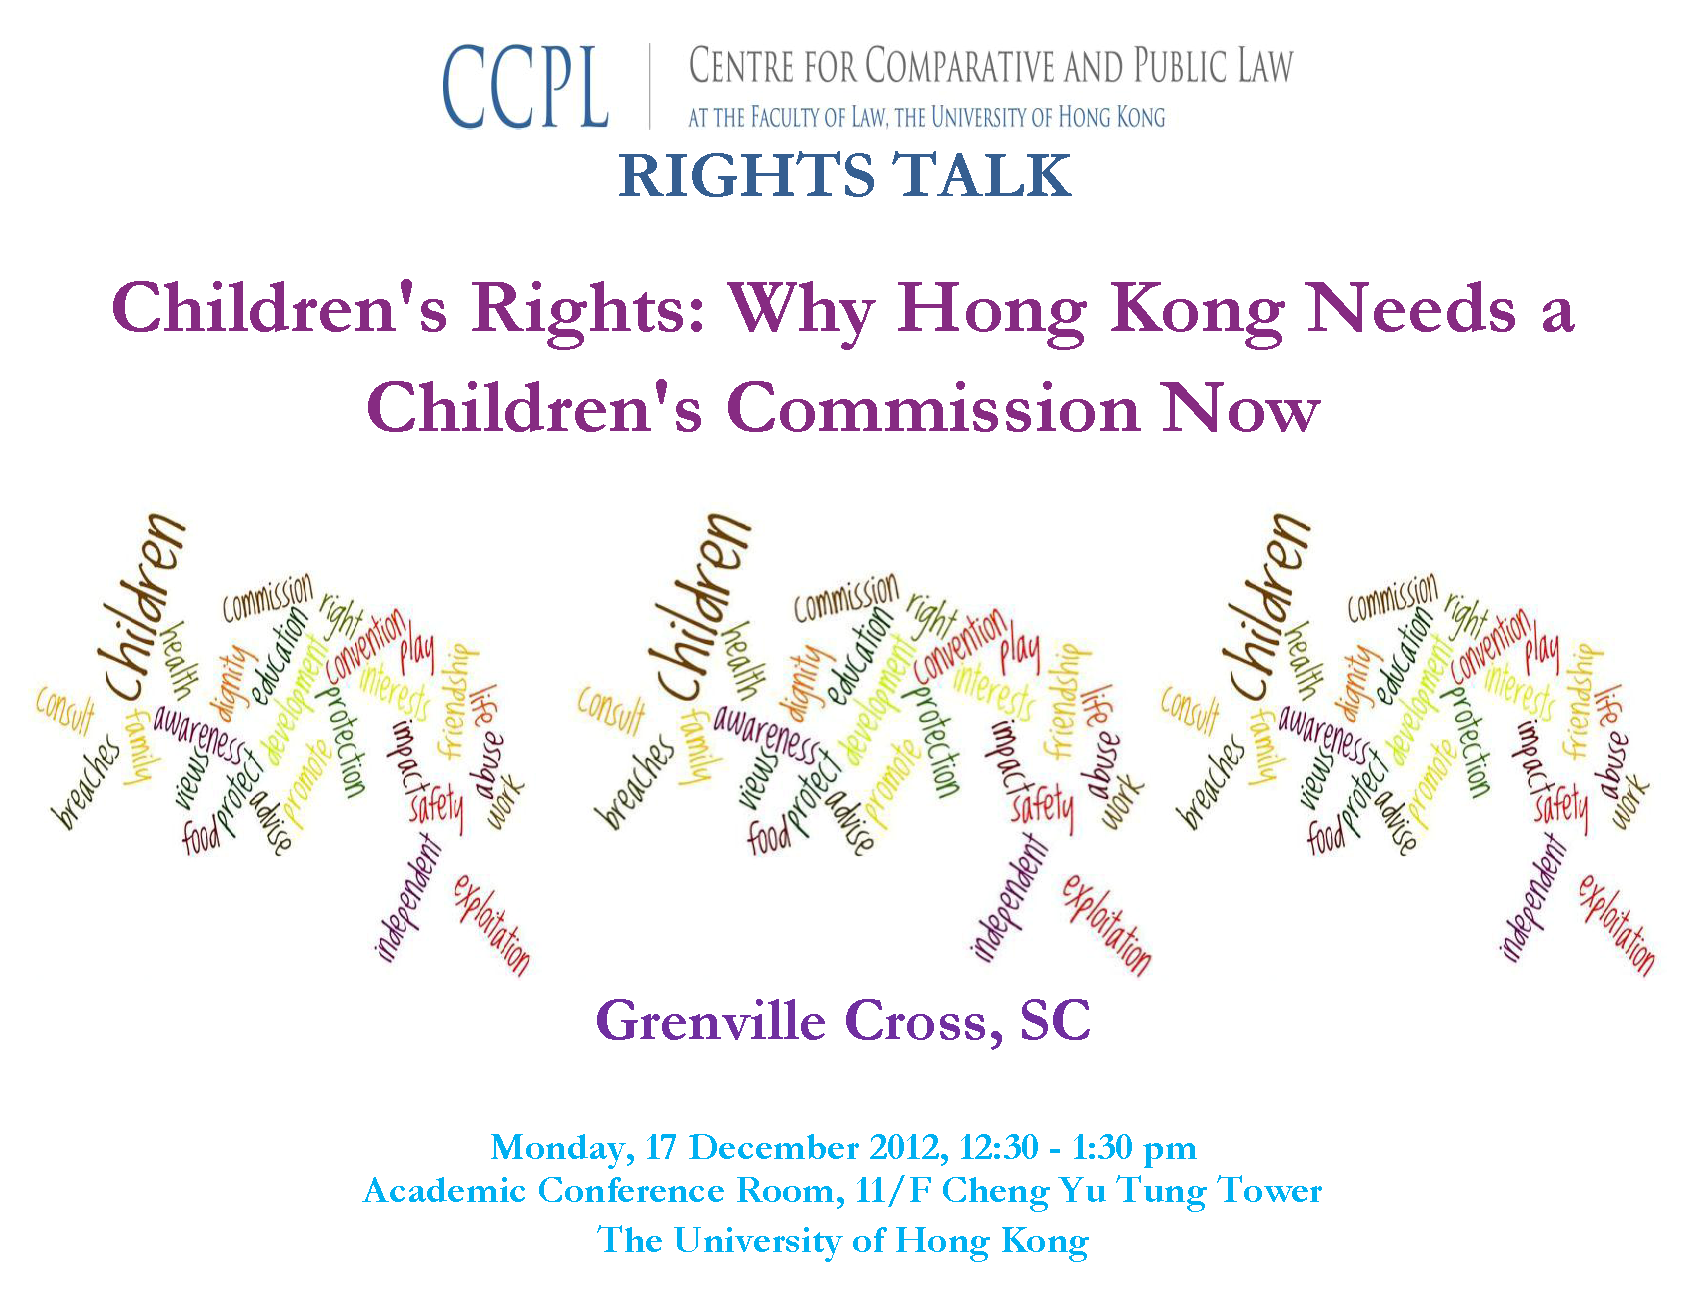 Children's Rights: Why Hong Kong Needs a Children's Commission Now